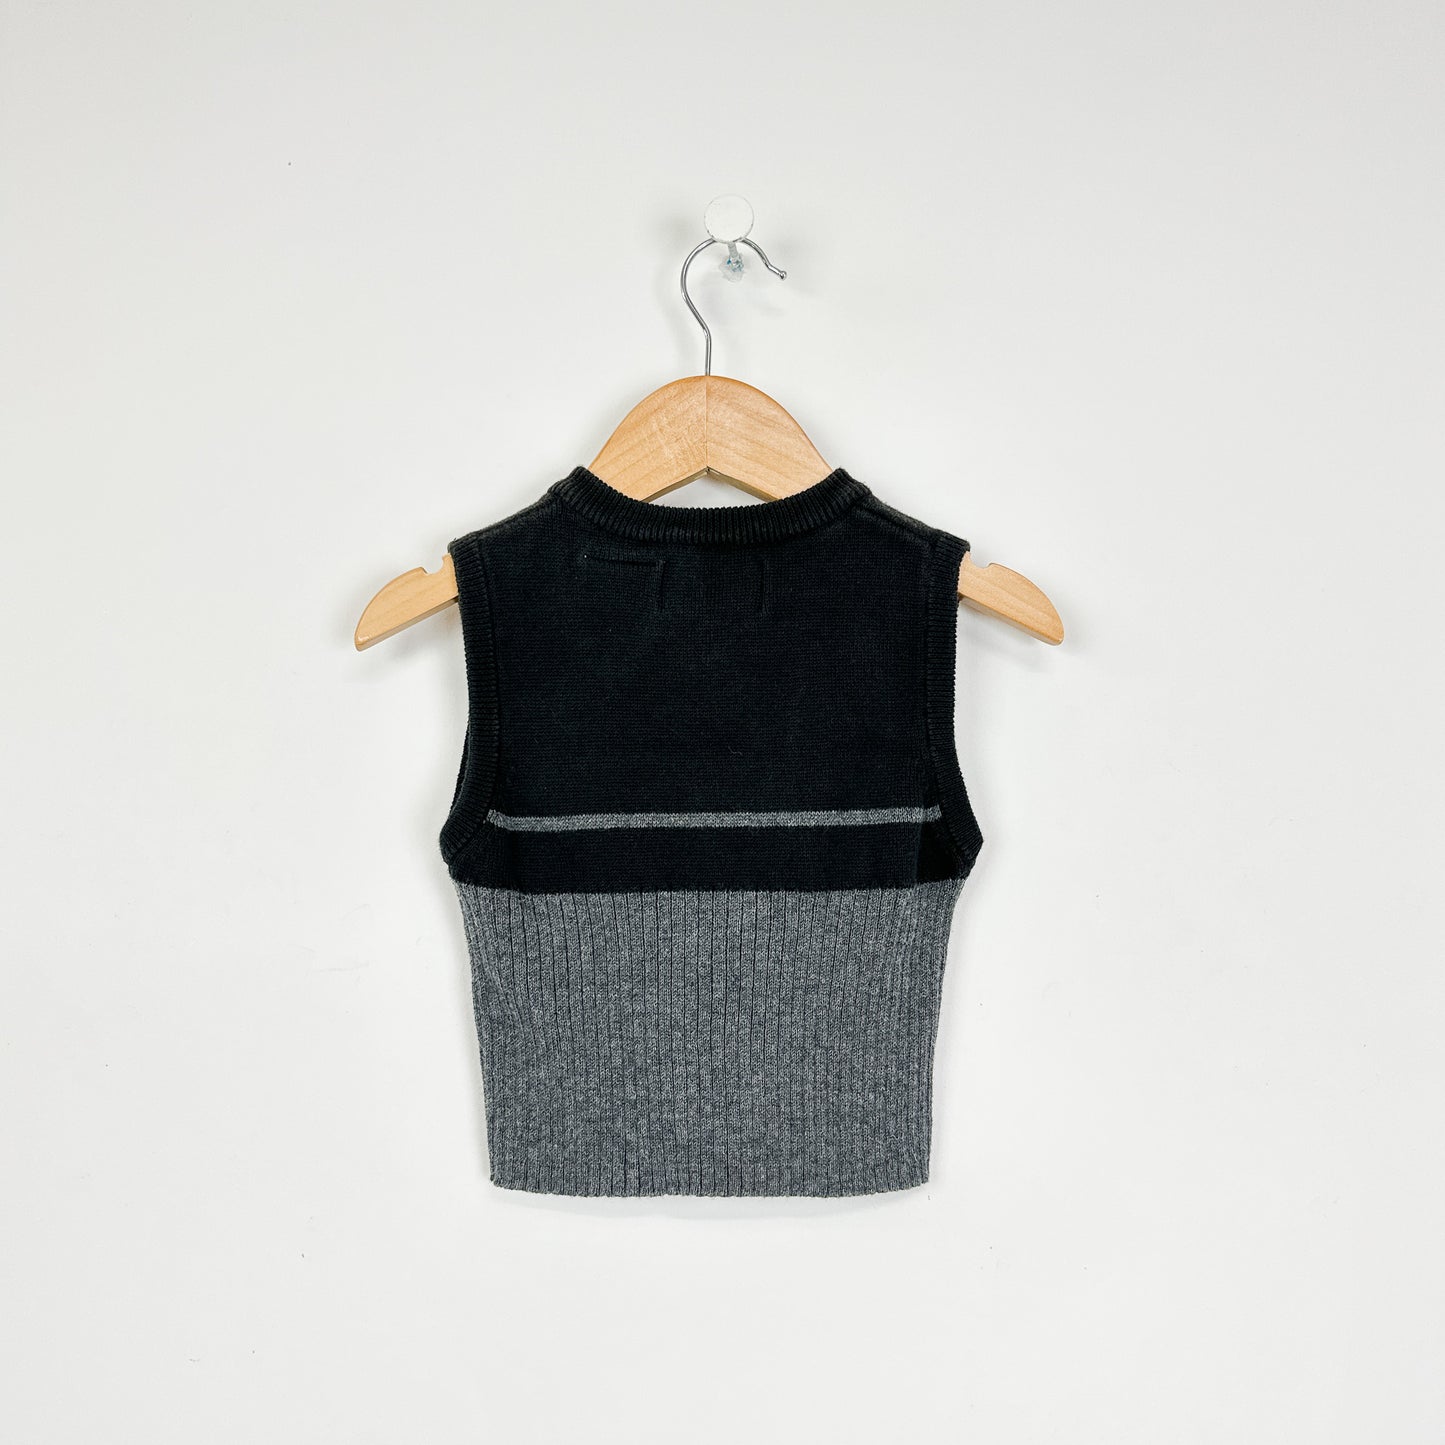 90's Toddler Black and Gray Sweater Vest - 18mo